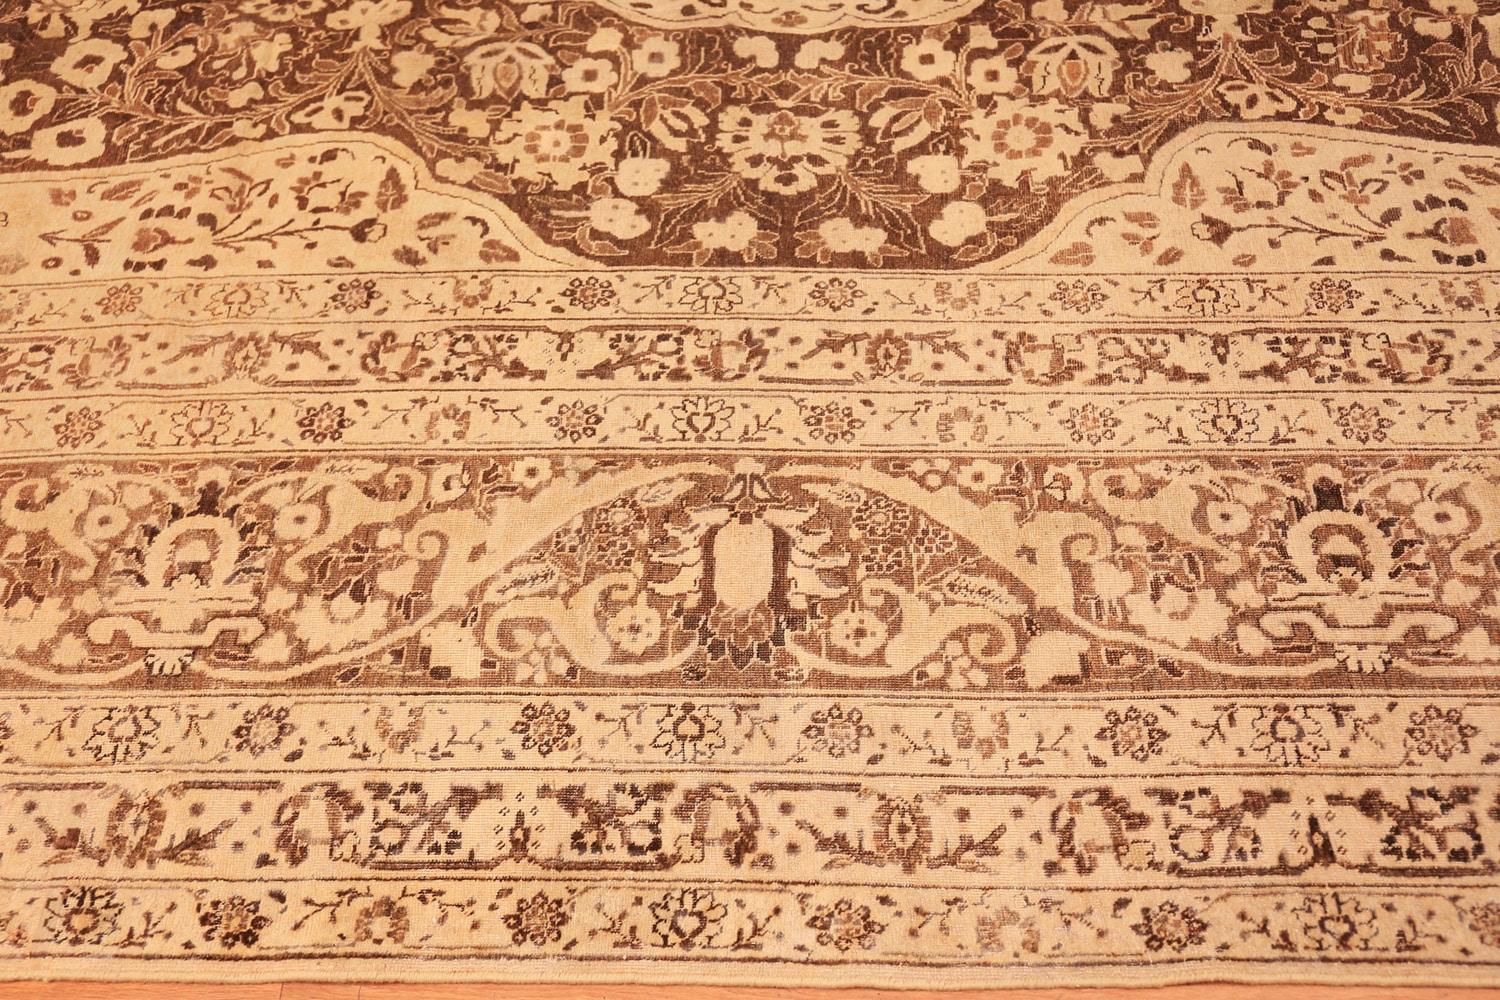 Finely Woven and Decorative Large Antique Persian Tabriz Rug, Country of Origin / Rug Type: Persia Rugs, Circa Date: First Quarter of The 20th Century. Size: 12 ft x 18 ft (3.66 m x 5.49 m)

